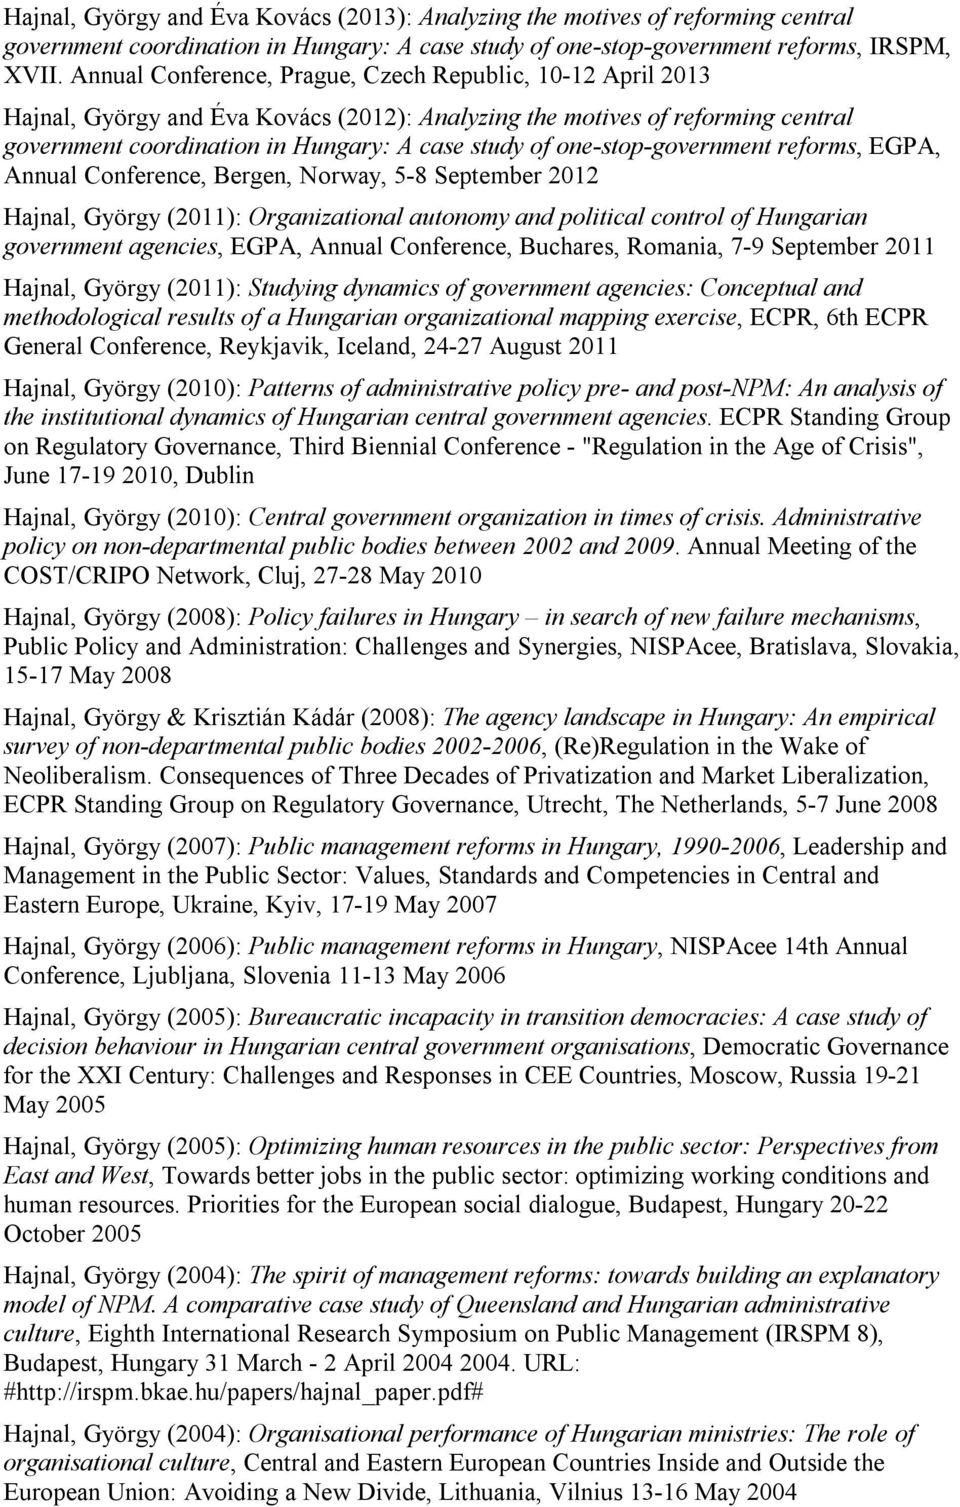 one-stop-government reforms, EGPA, Annual Conference, Bergen, Norway, 5-8 September 2012 Hajnal, György (2011): Organizational autonomy and political control of Hungarian government agencies, EGPA,